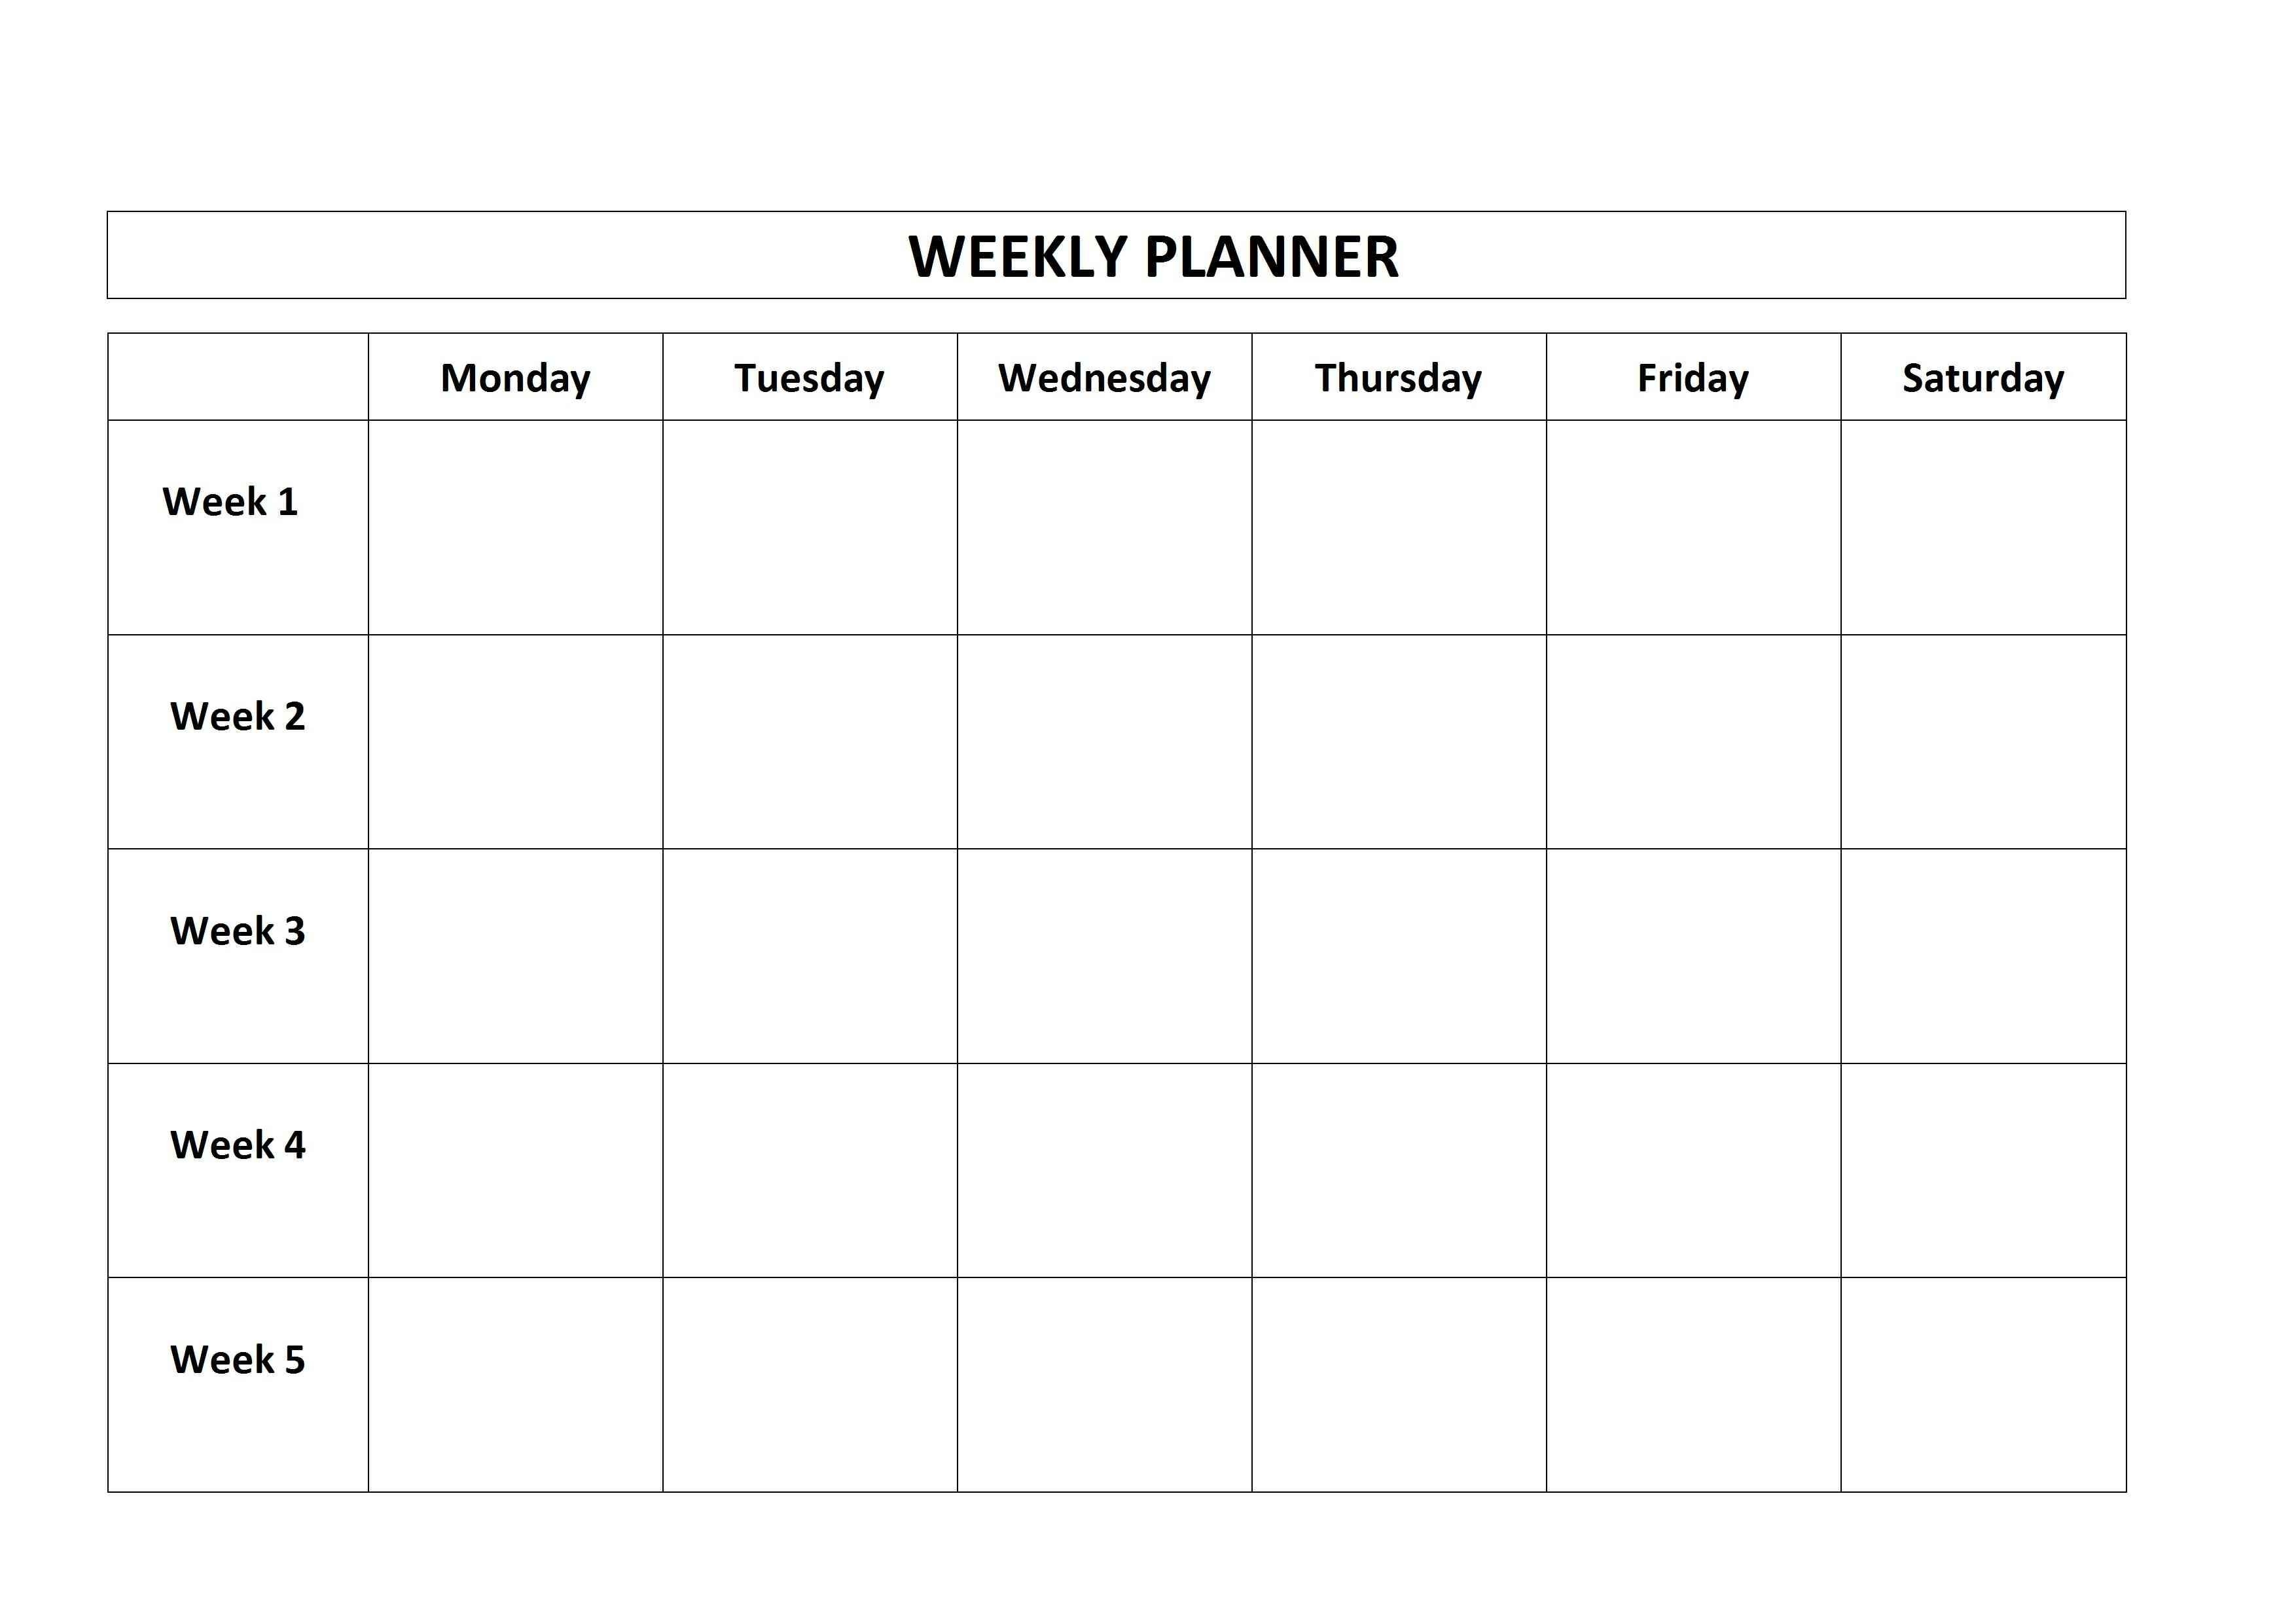 Free Printable Weekly Planner Monday Friday School Calendar-Monday - Friday Printable Blank Calendar